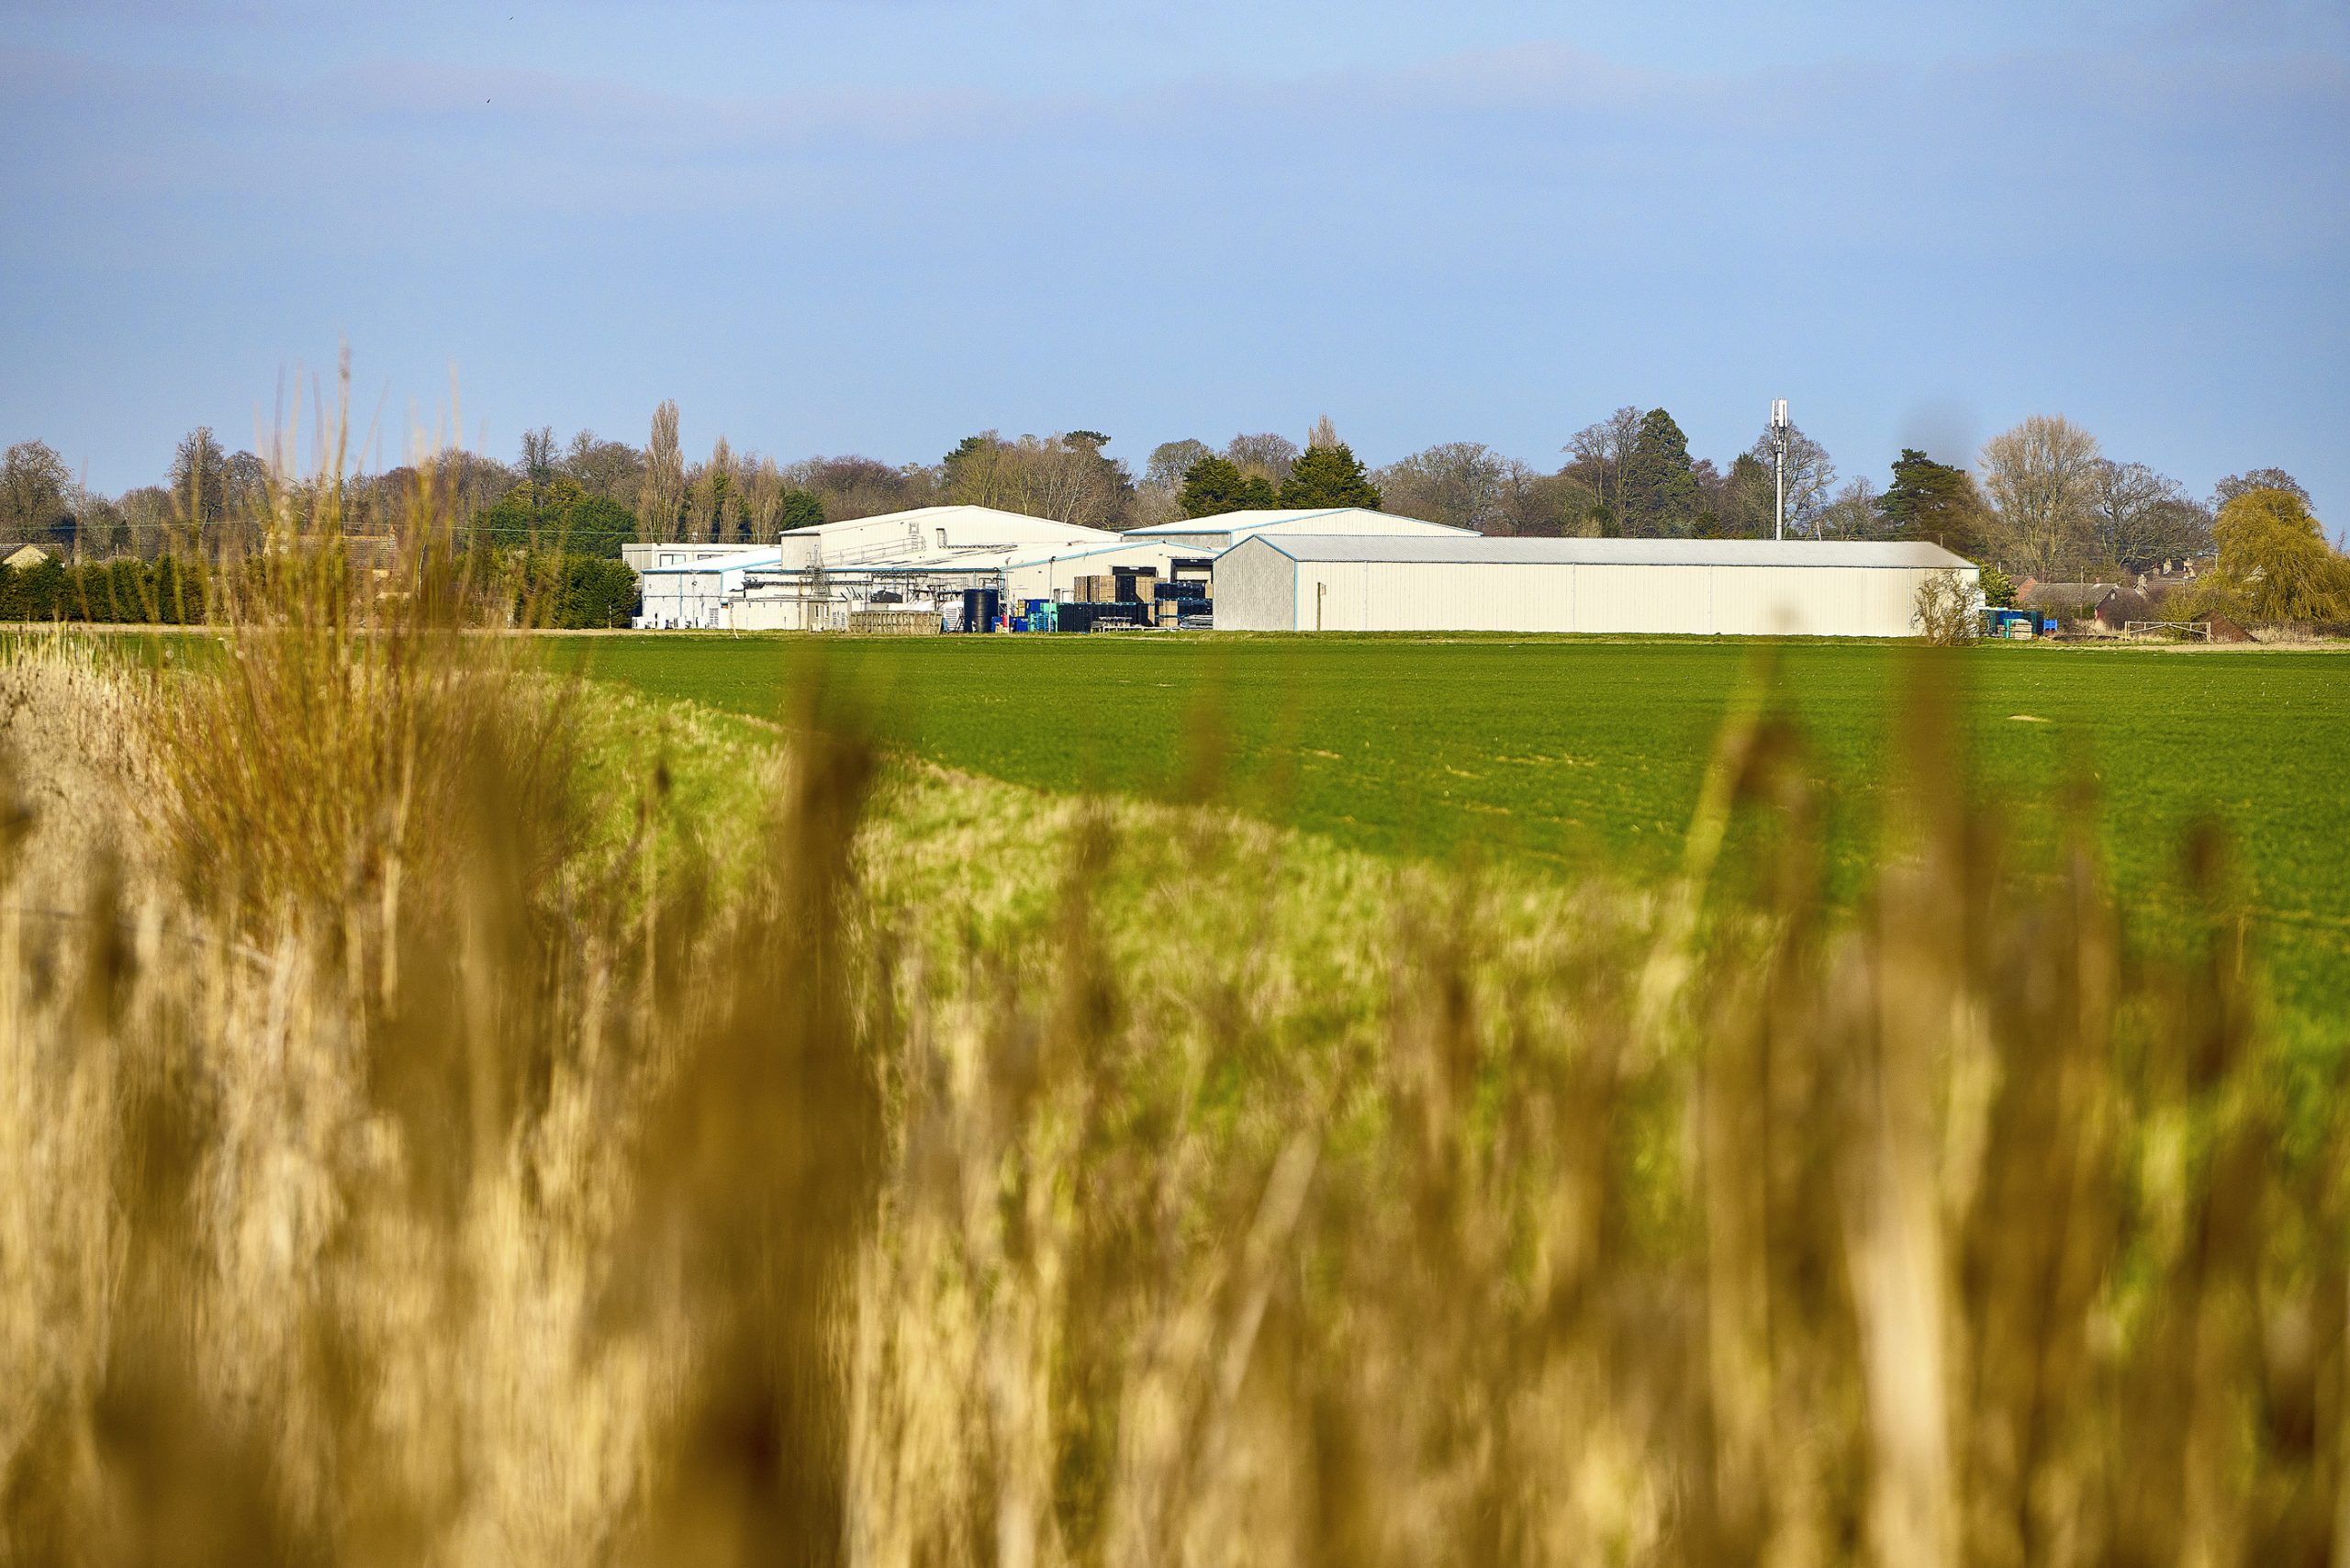 Wide shot of the site, with crops in the foreground